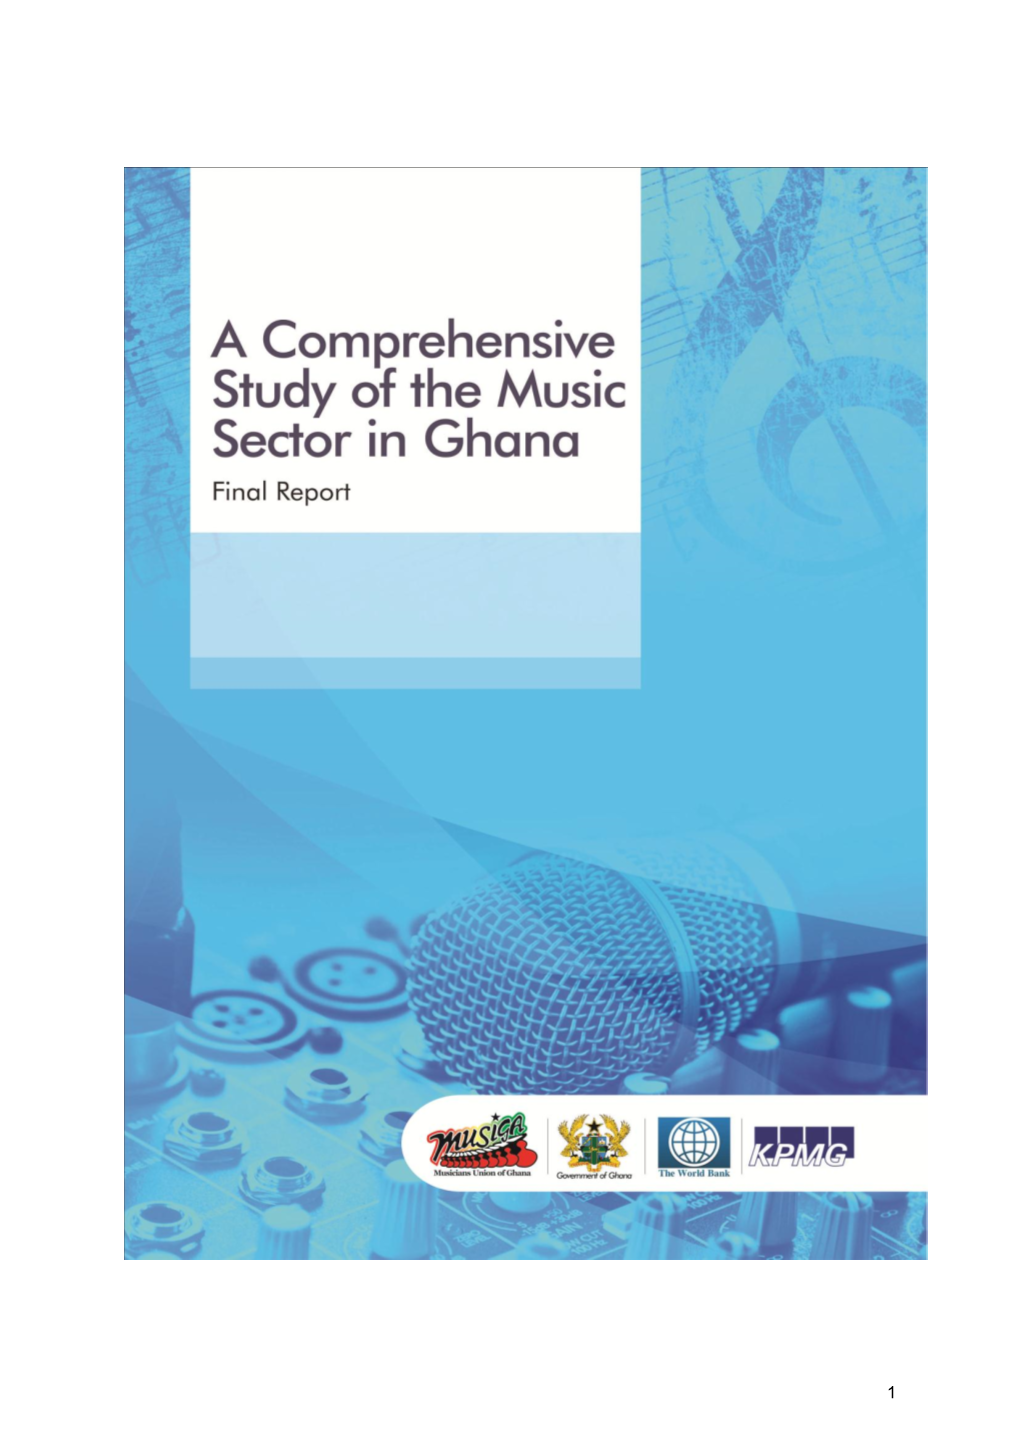 A Study of the Music Sector in Ghana Questionnaire for Traditional Folkloric Groups